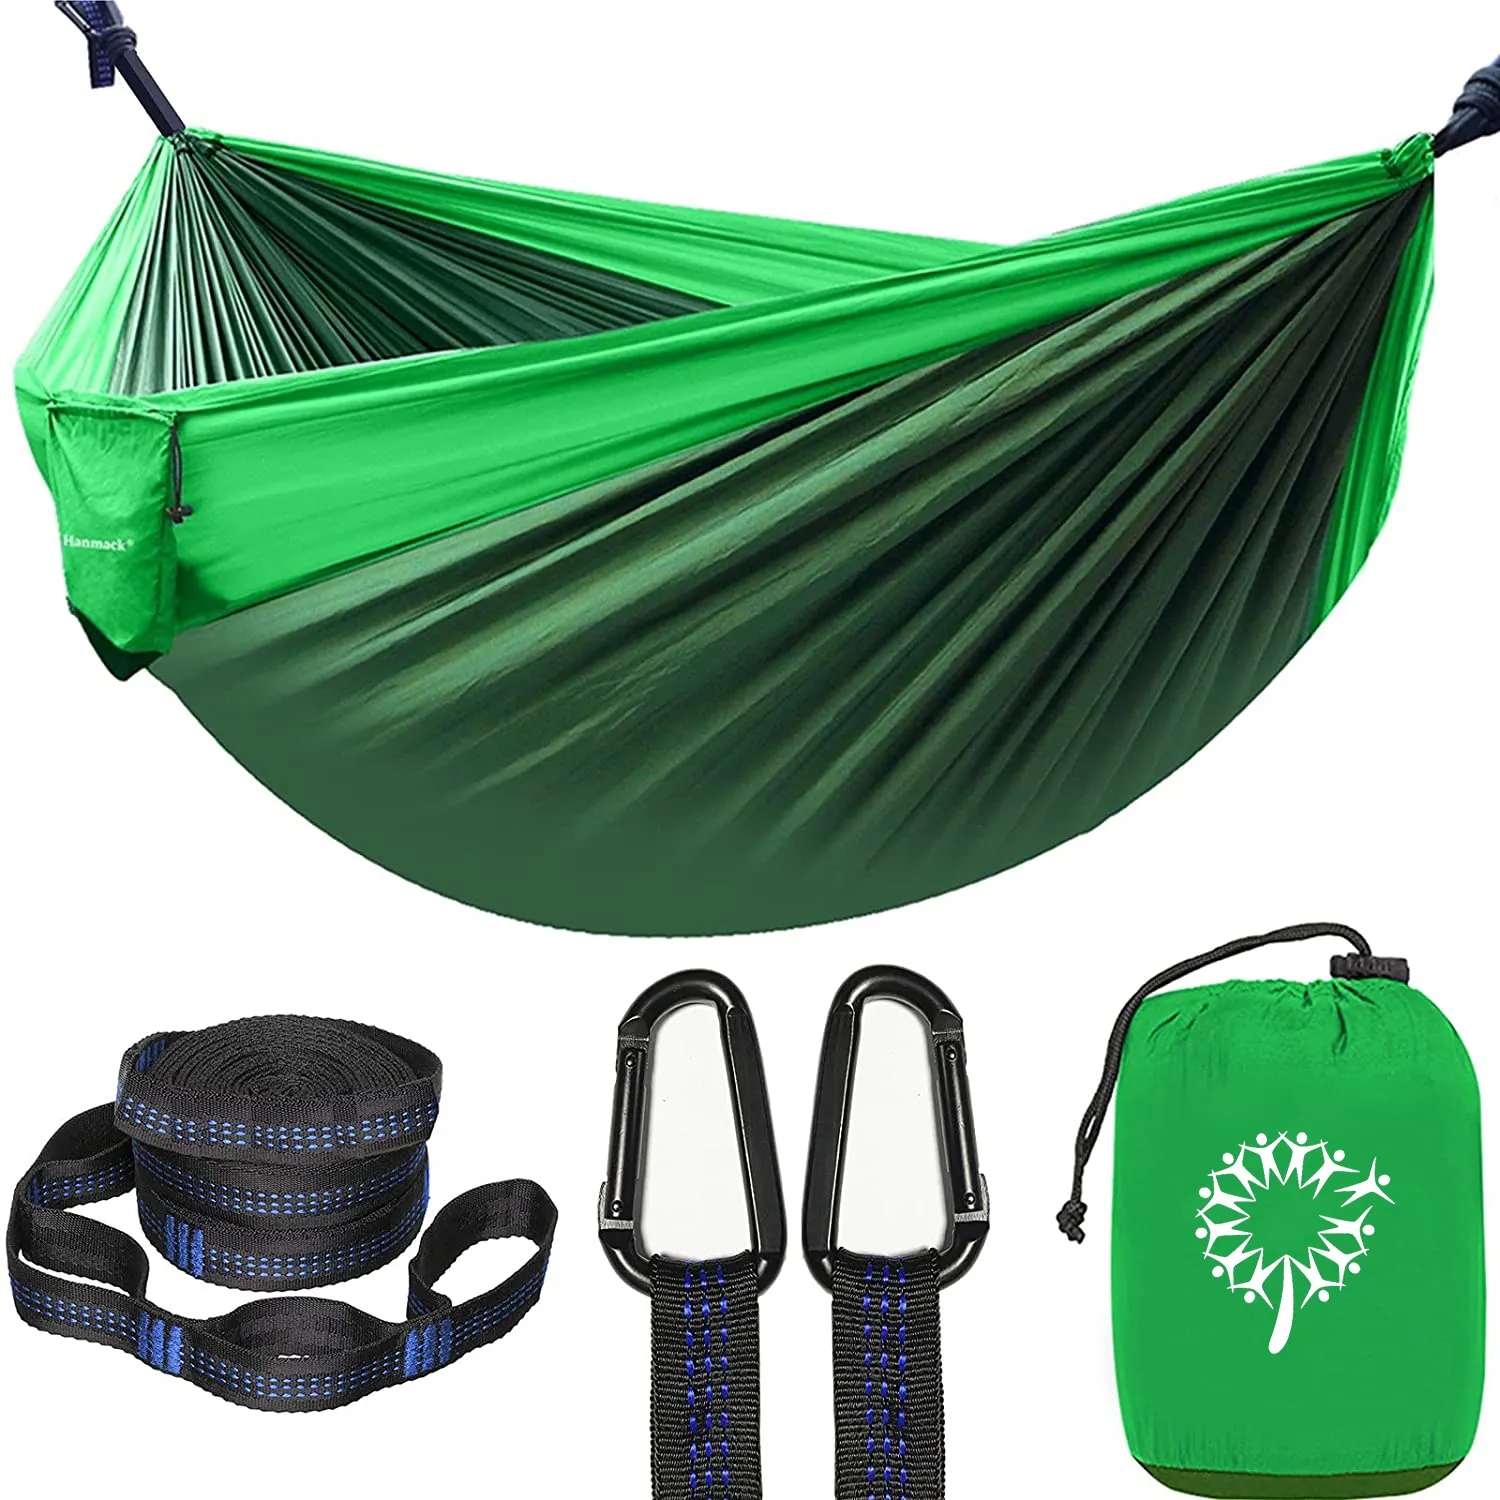 Lightweight 20D Nylon Waterproof Portable Strength Hammock for Outdoor Travel Camping